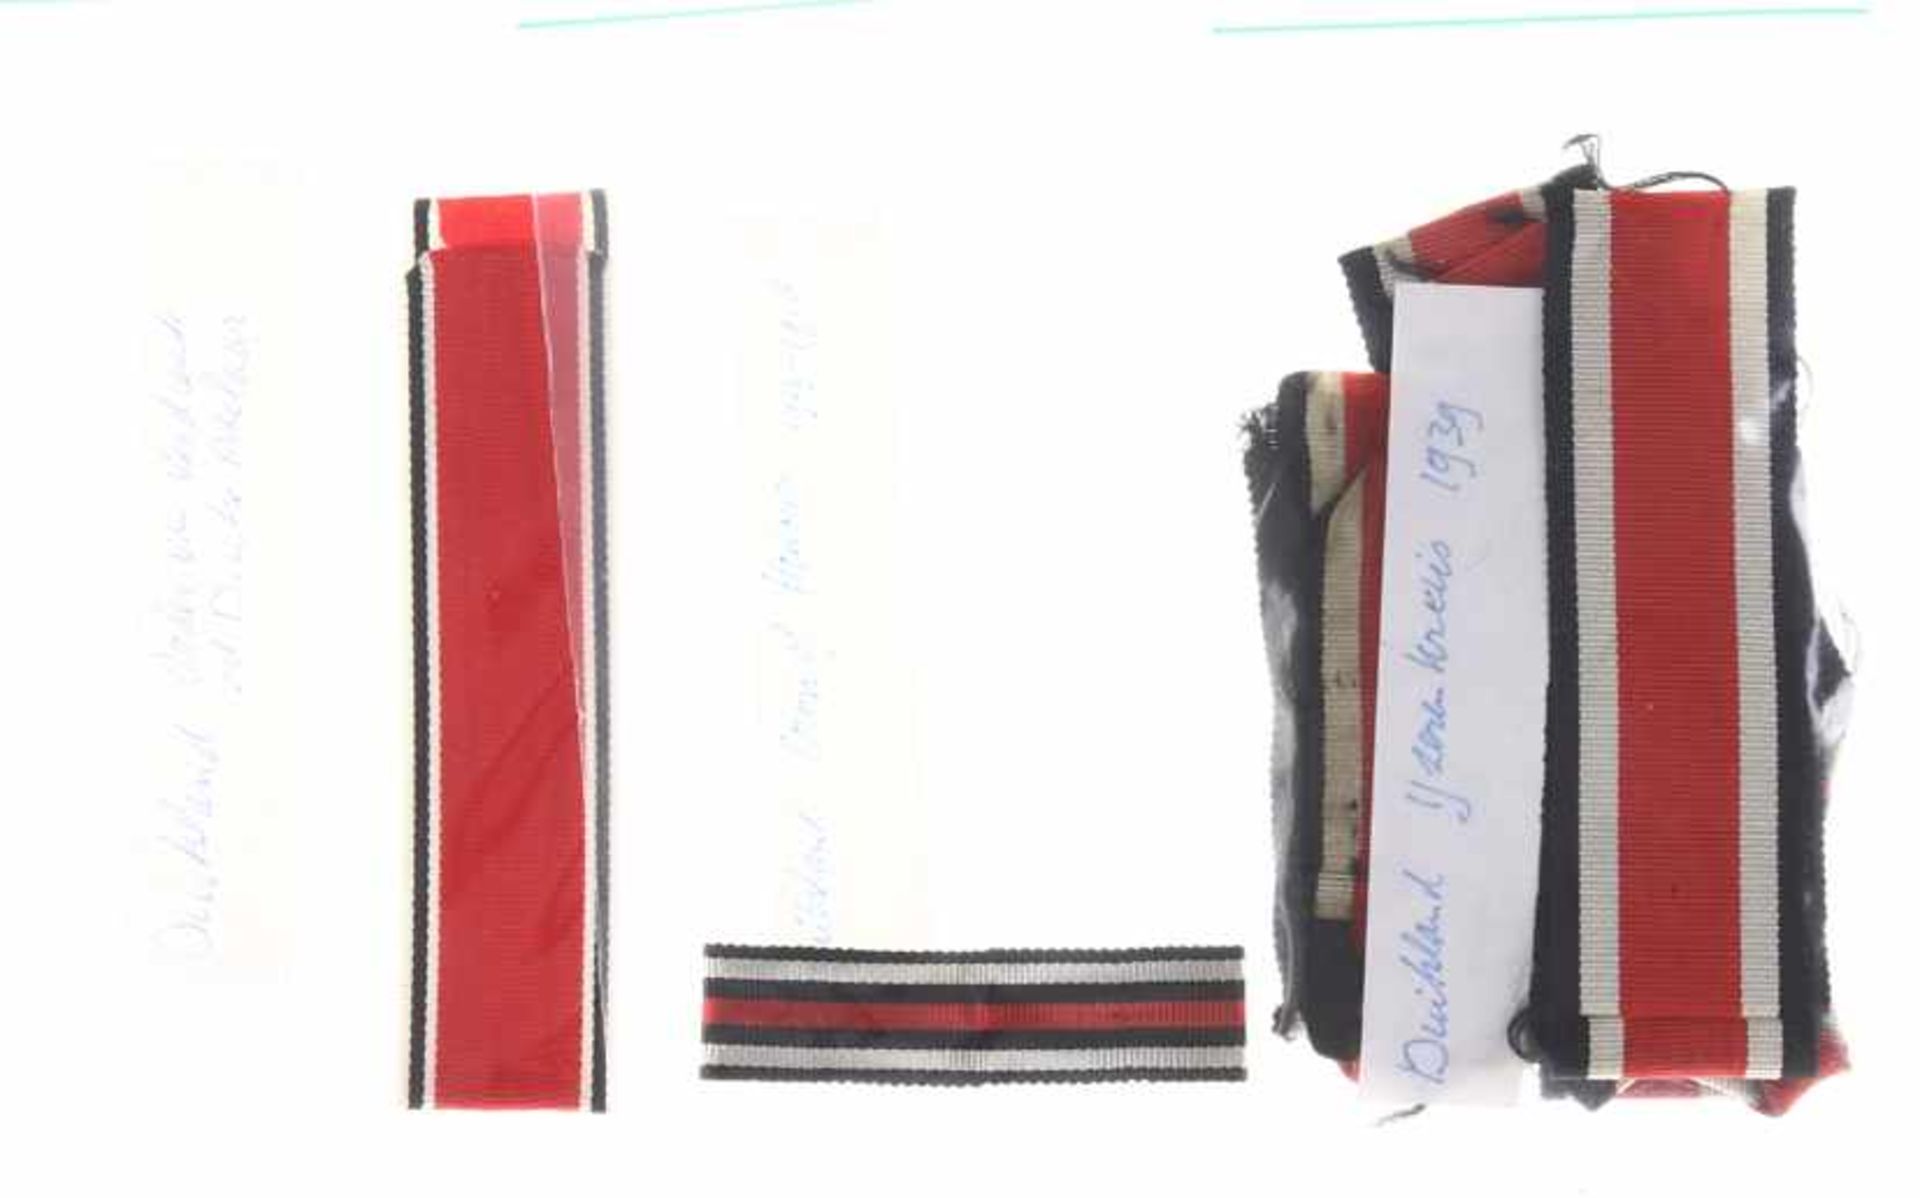 Duitsland / Germany - WWI-WWII, small lot of ribbons, amongst which EK2 and Deutscher Adler